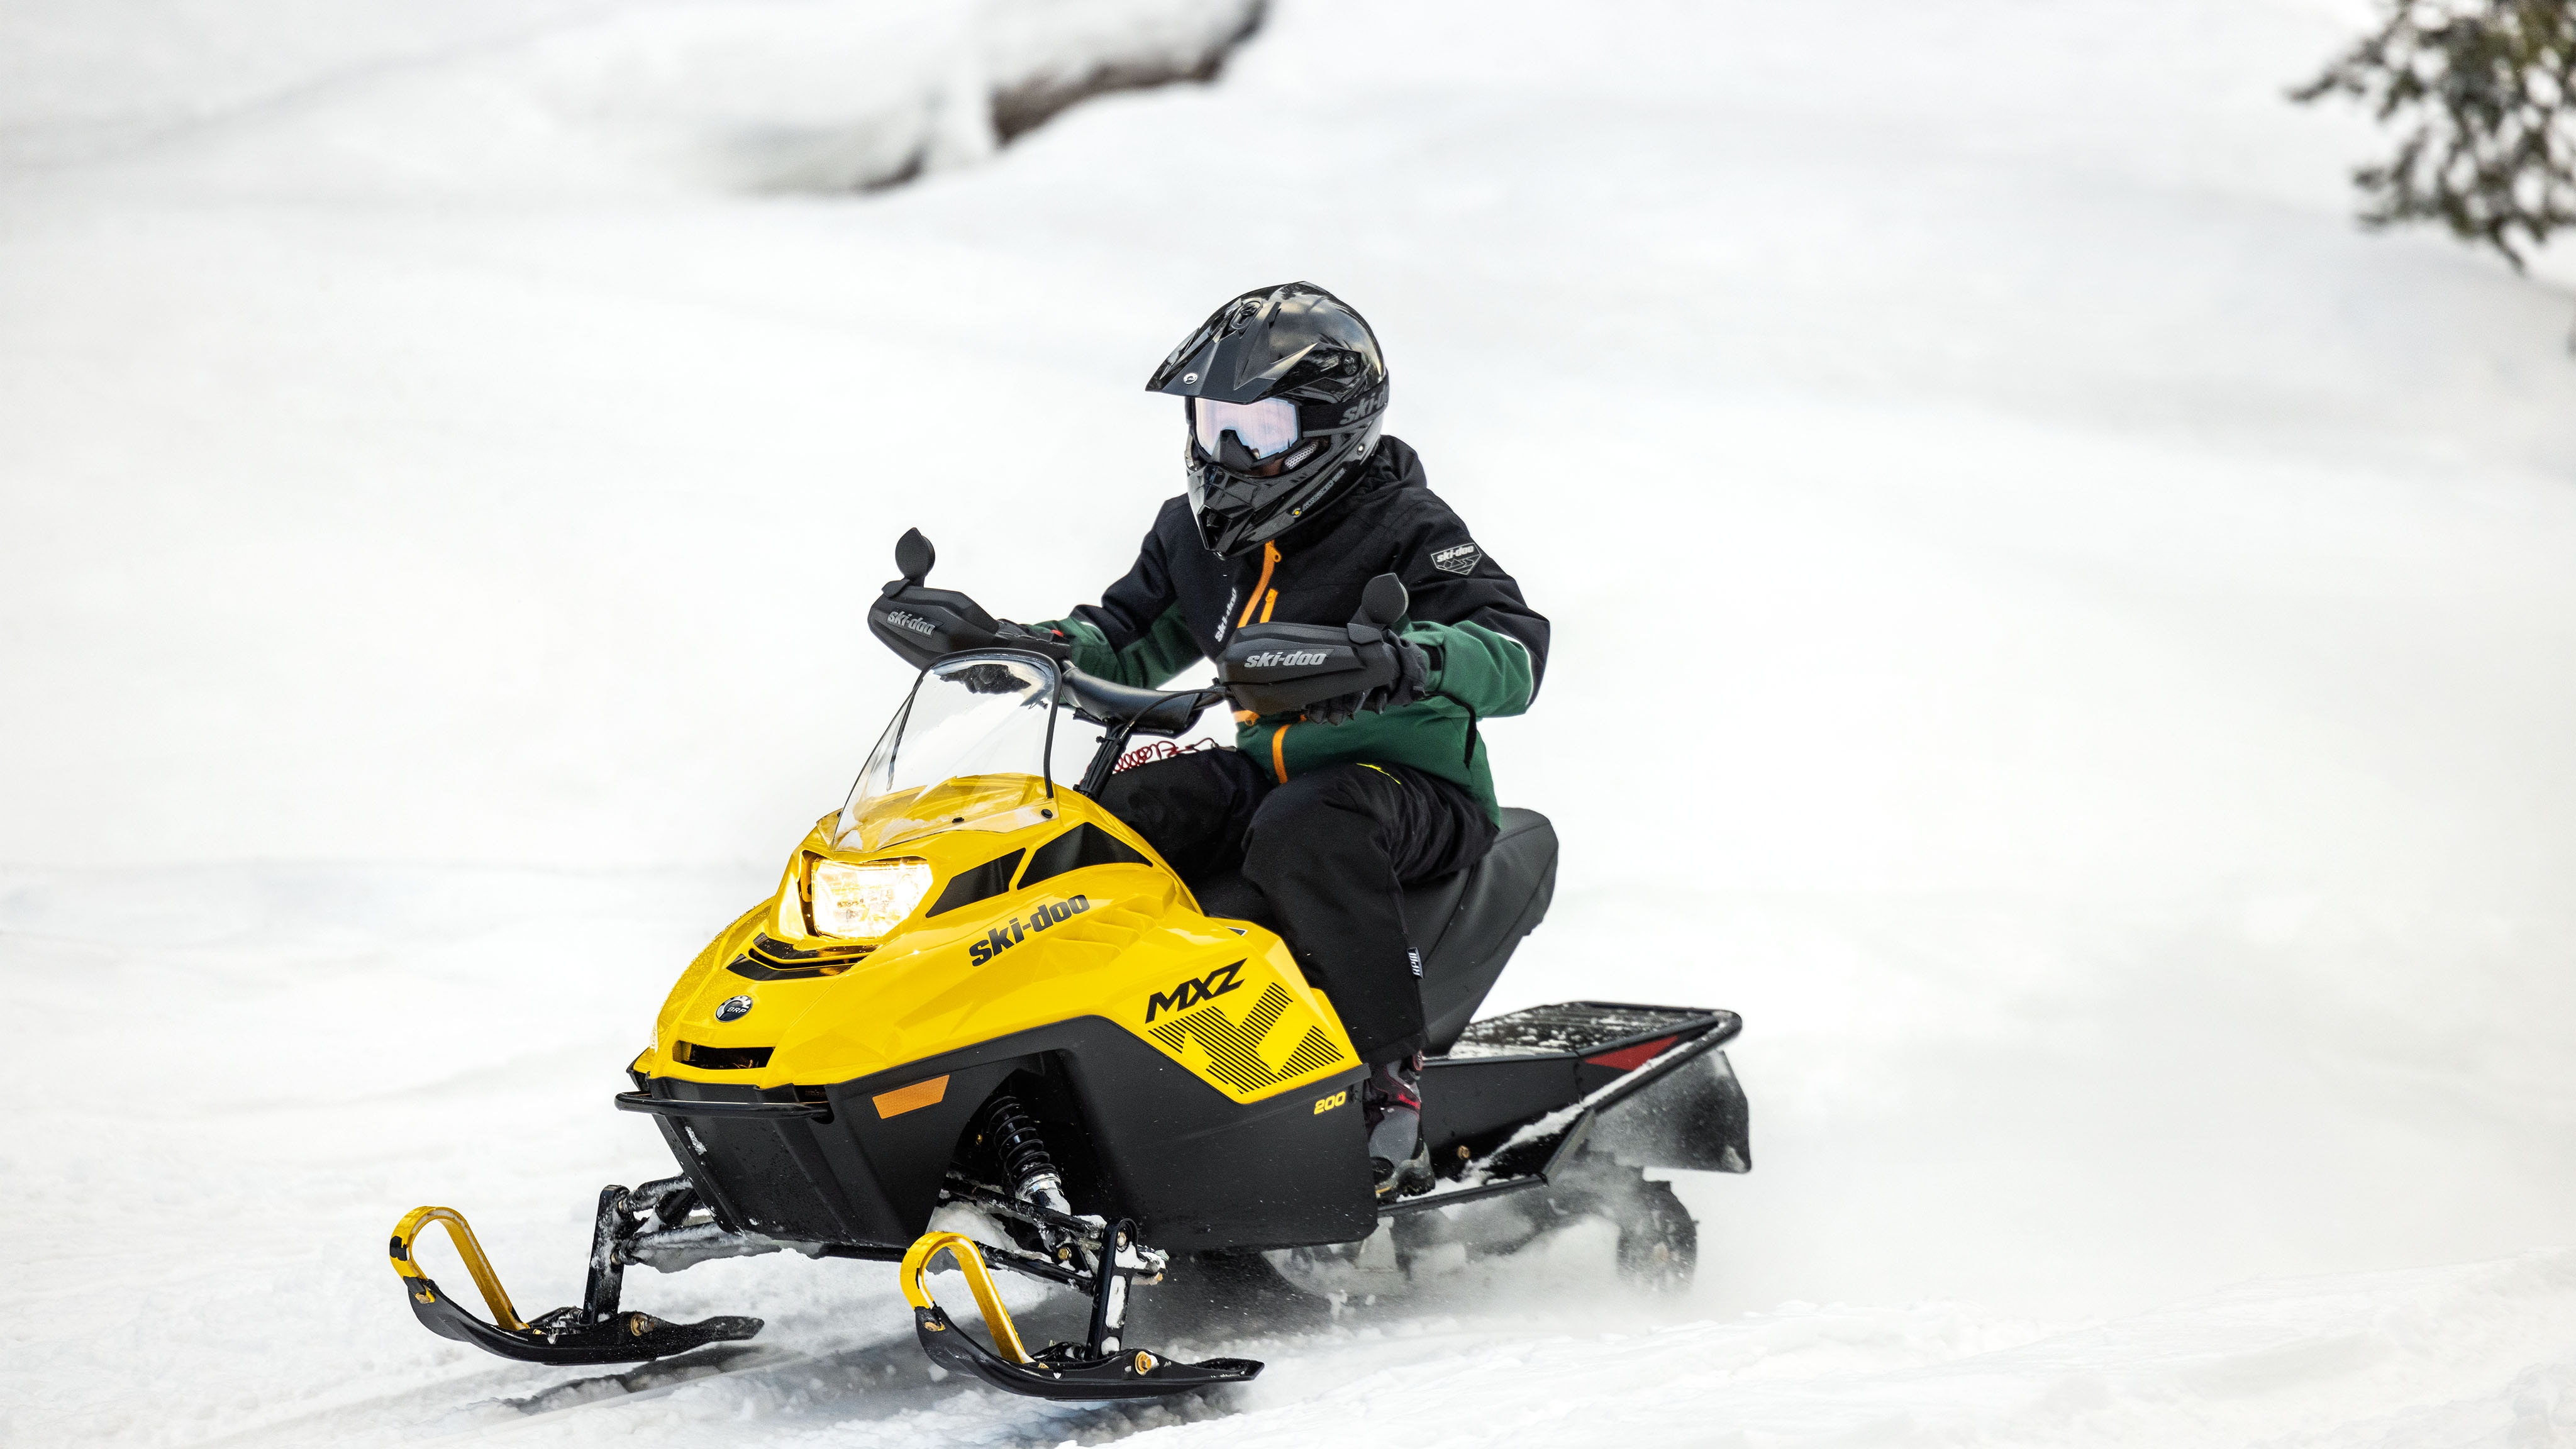 Young rider riding the Ski-Doo MXZ 200, the Youth Snowmobile